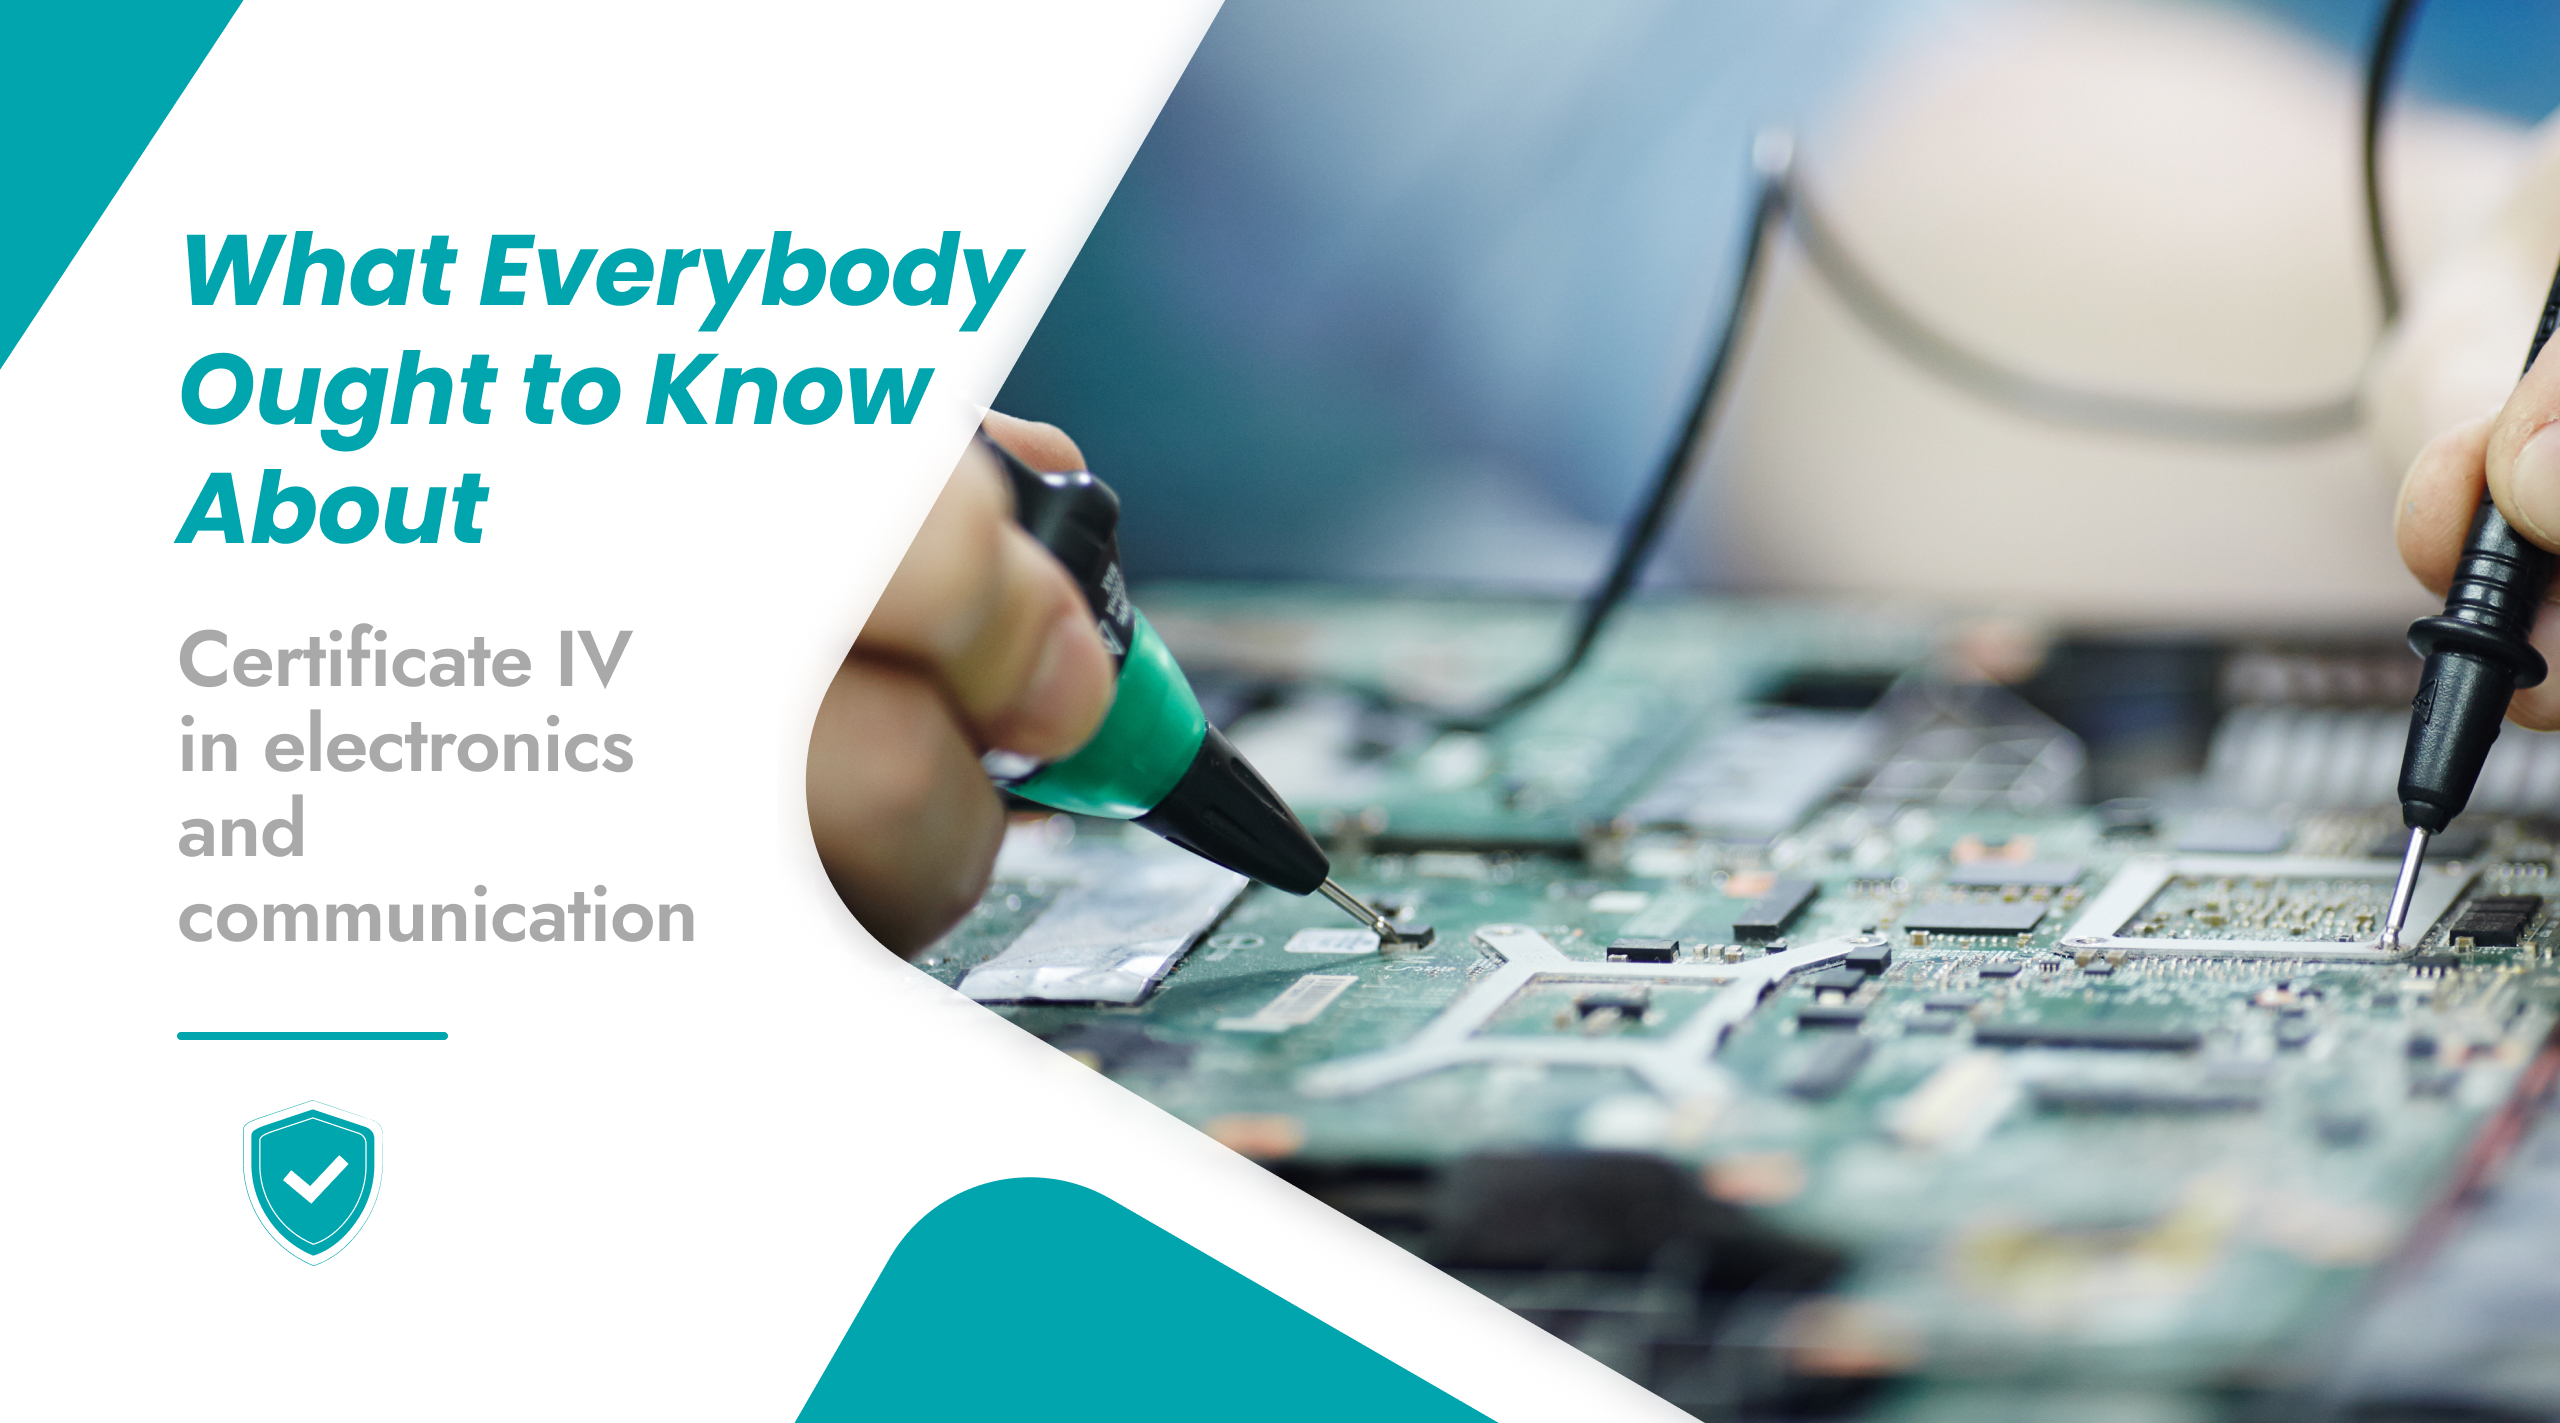 What Everybody Ought To Know About Certificate IV In Electronics And Communications